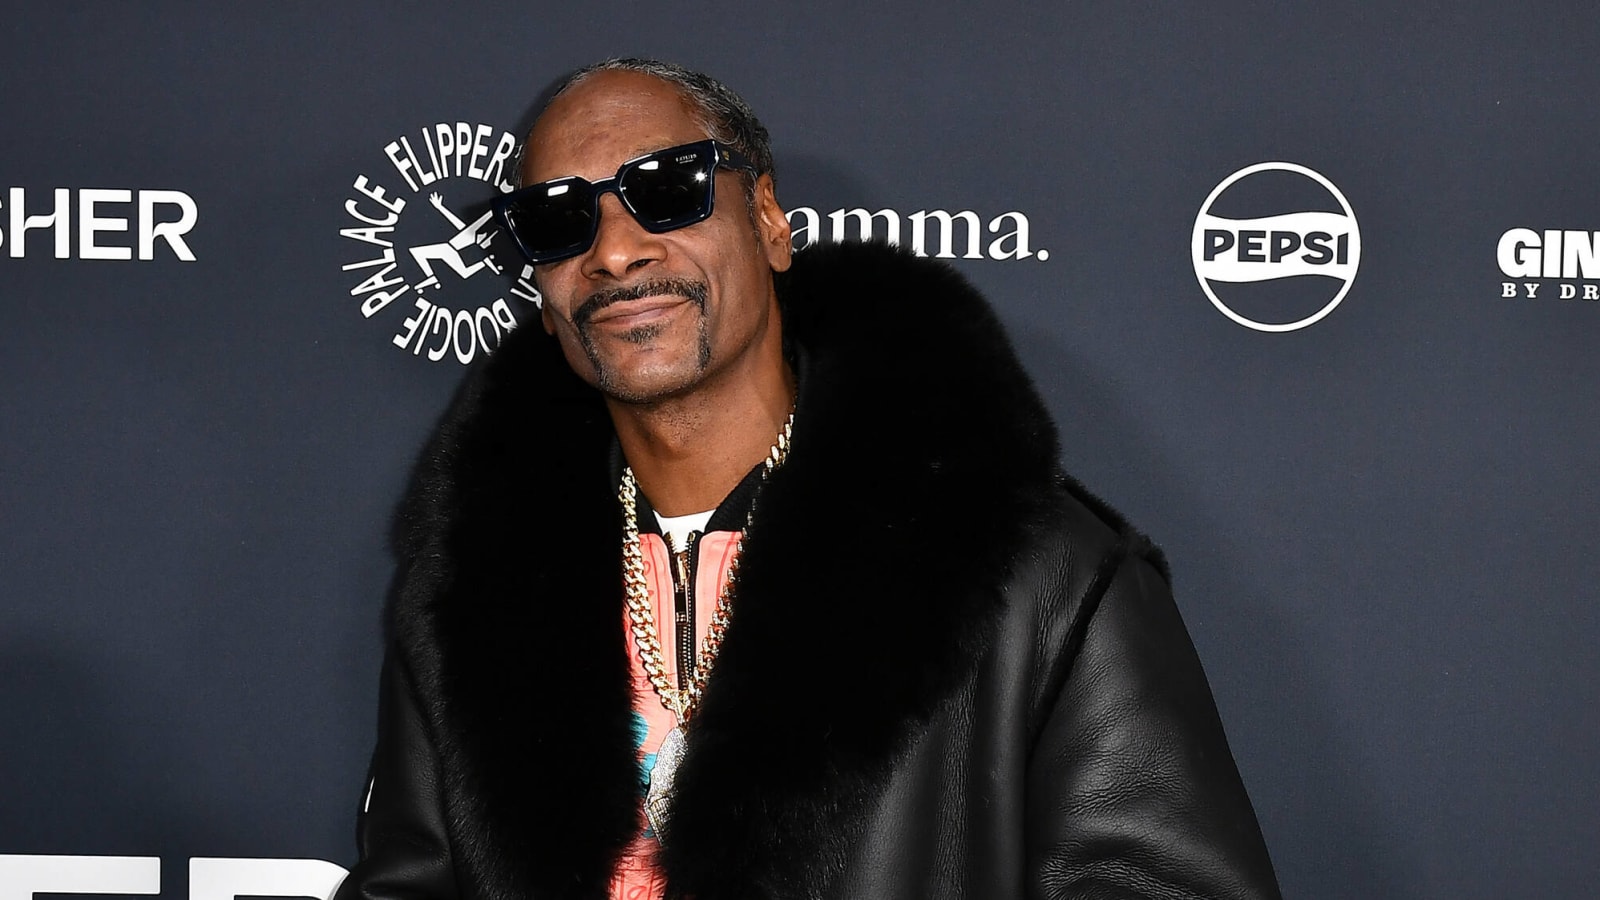 Snoop Dogg and Dr. Dre to Sponsor Arizona Bowl with ‘Gin & Juice’